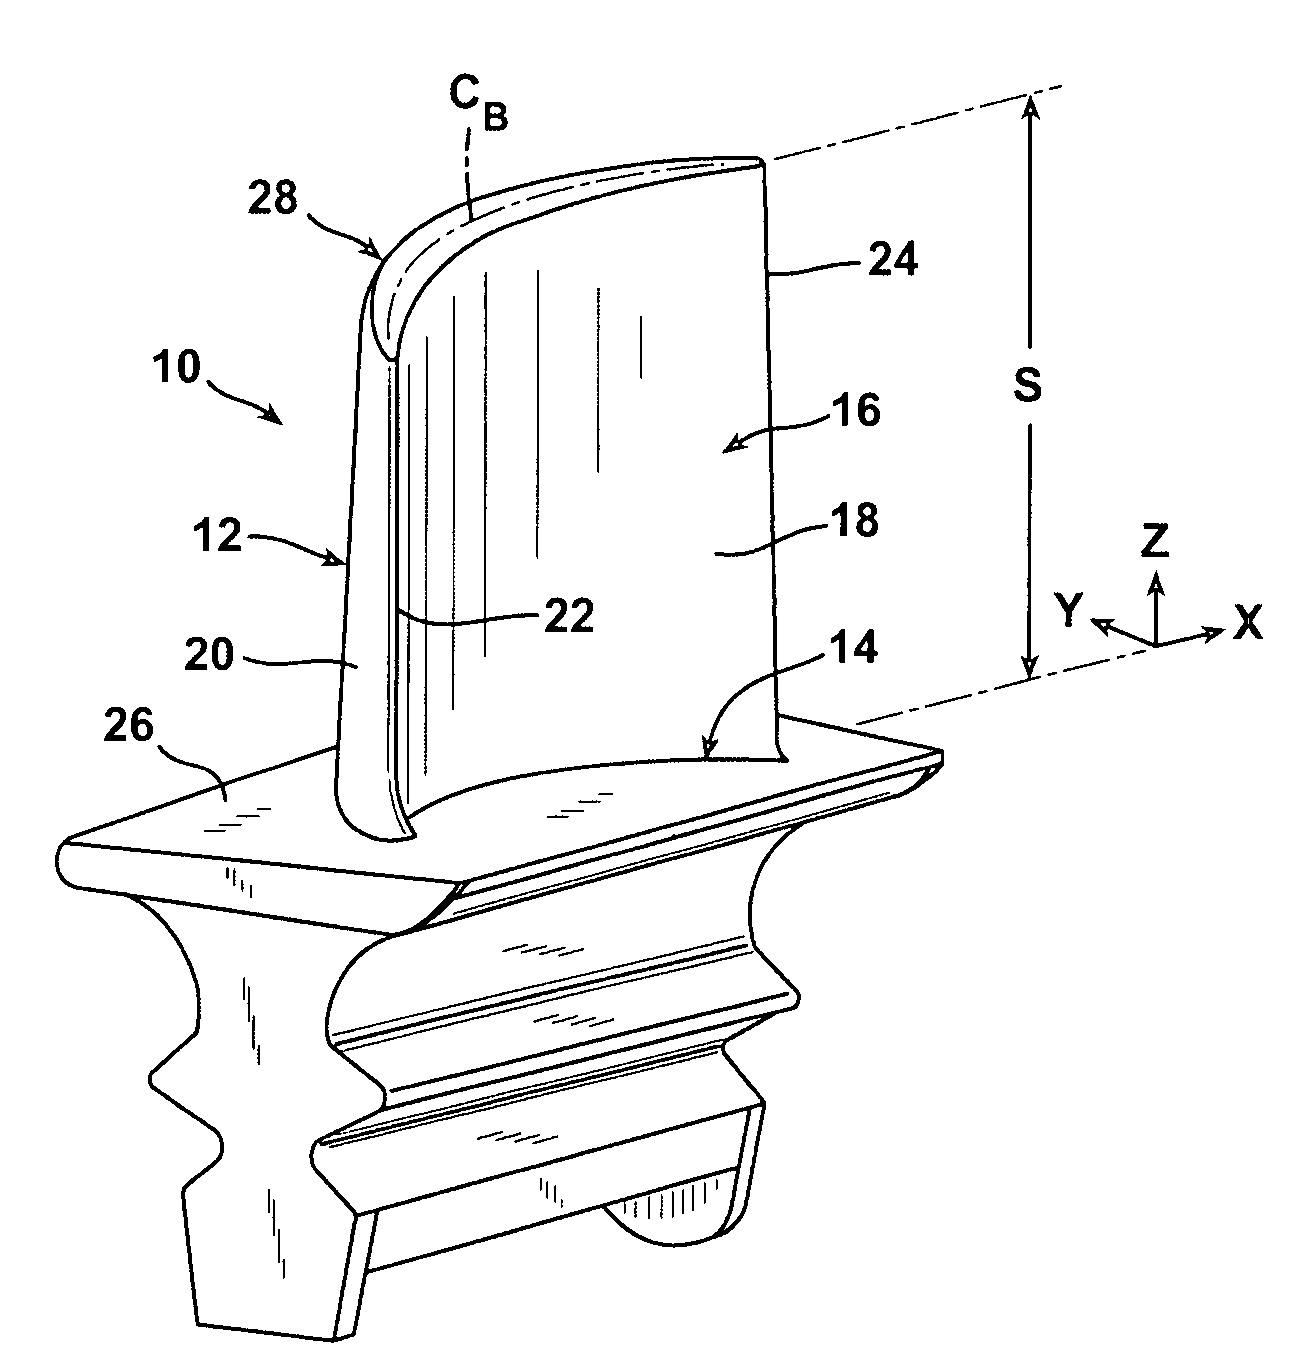 External profile for turbine blade airfoil